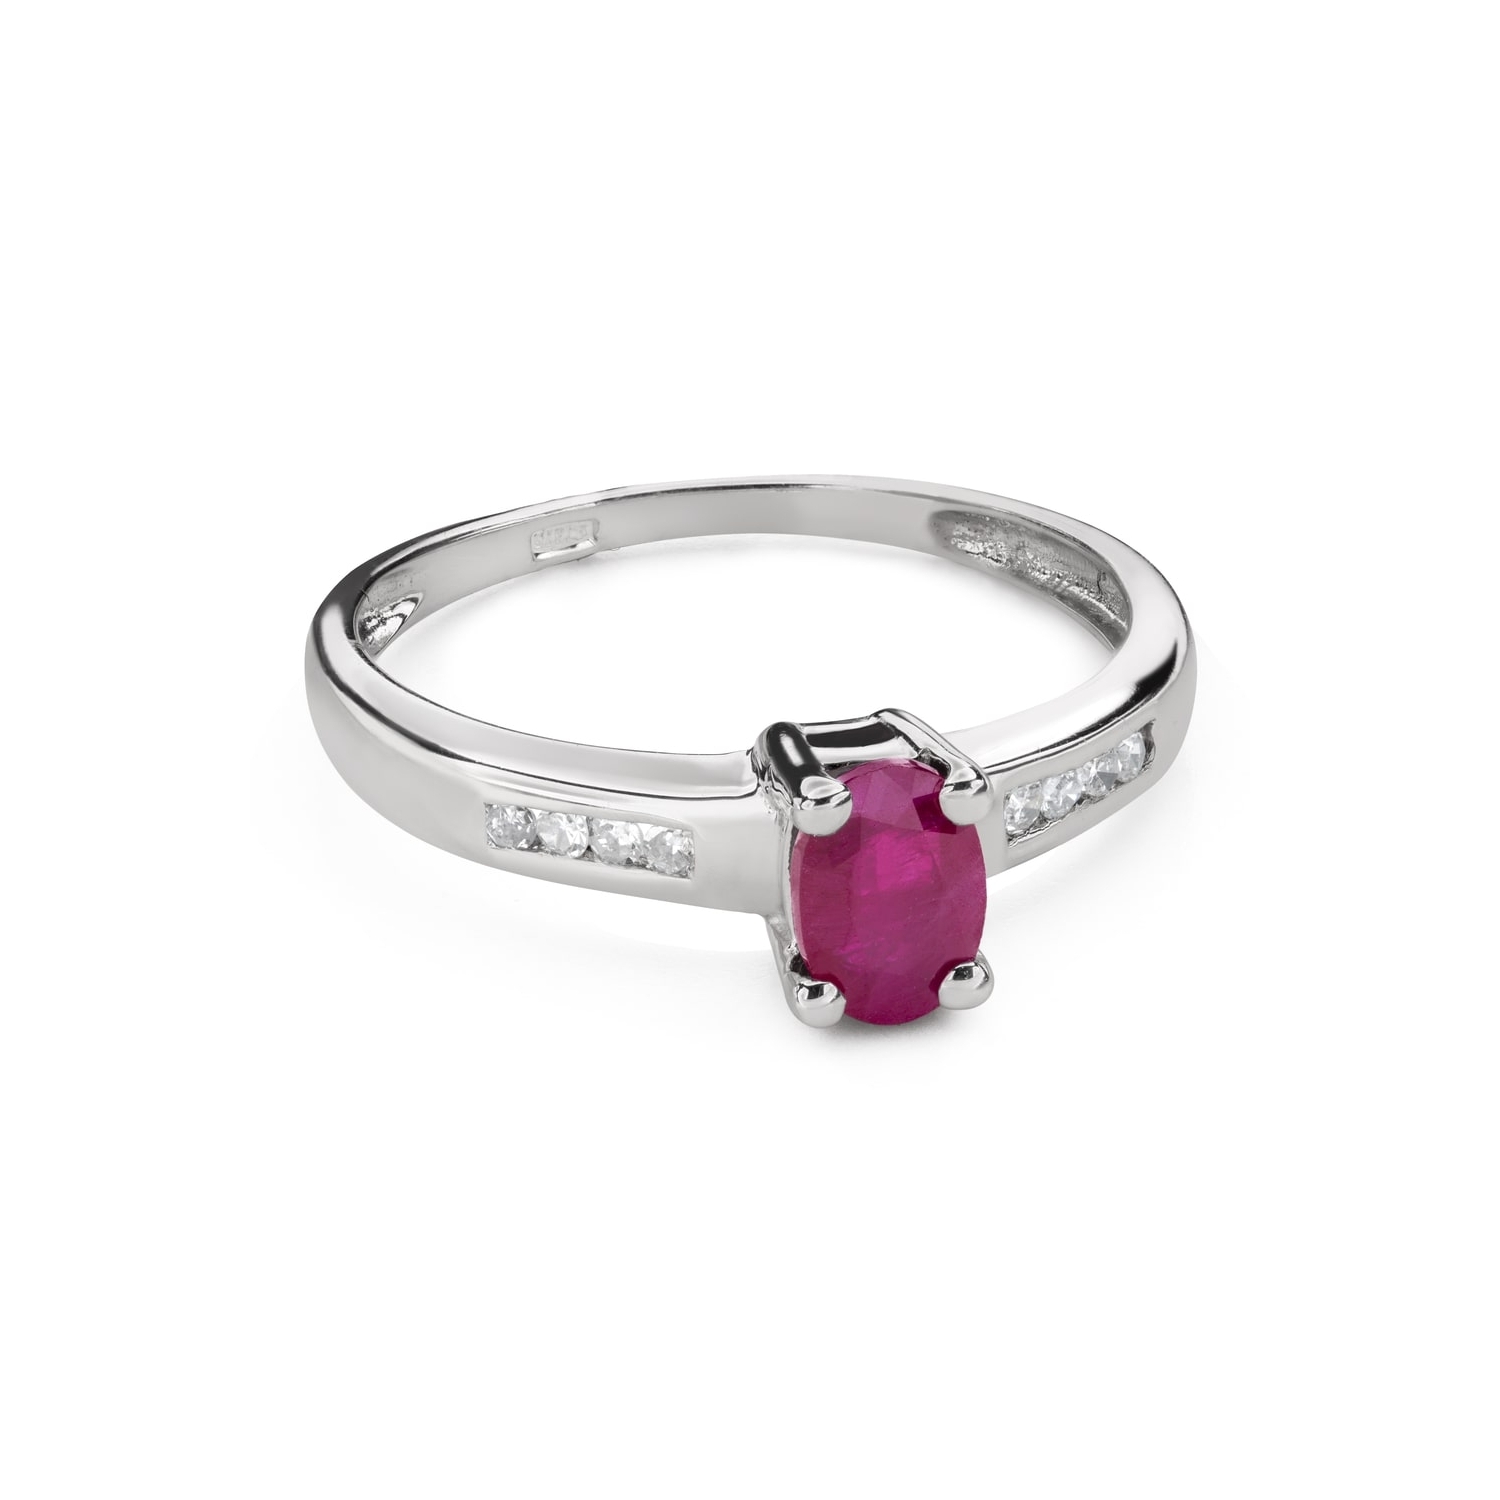 Engagement ring with gemstones "Colors 99"